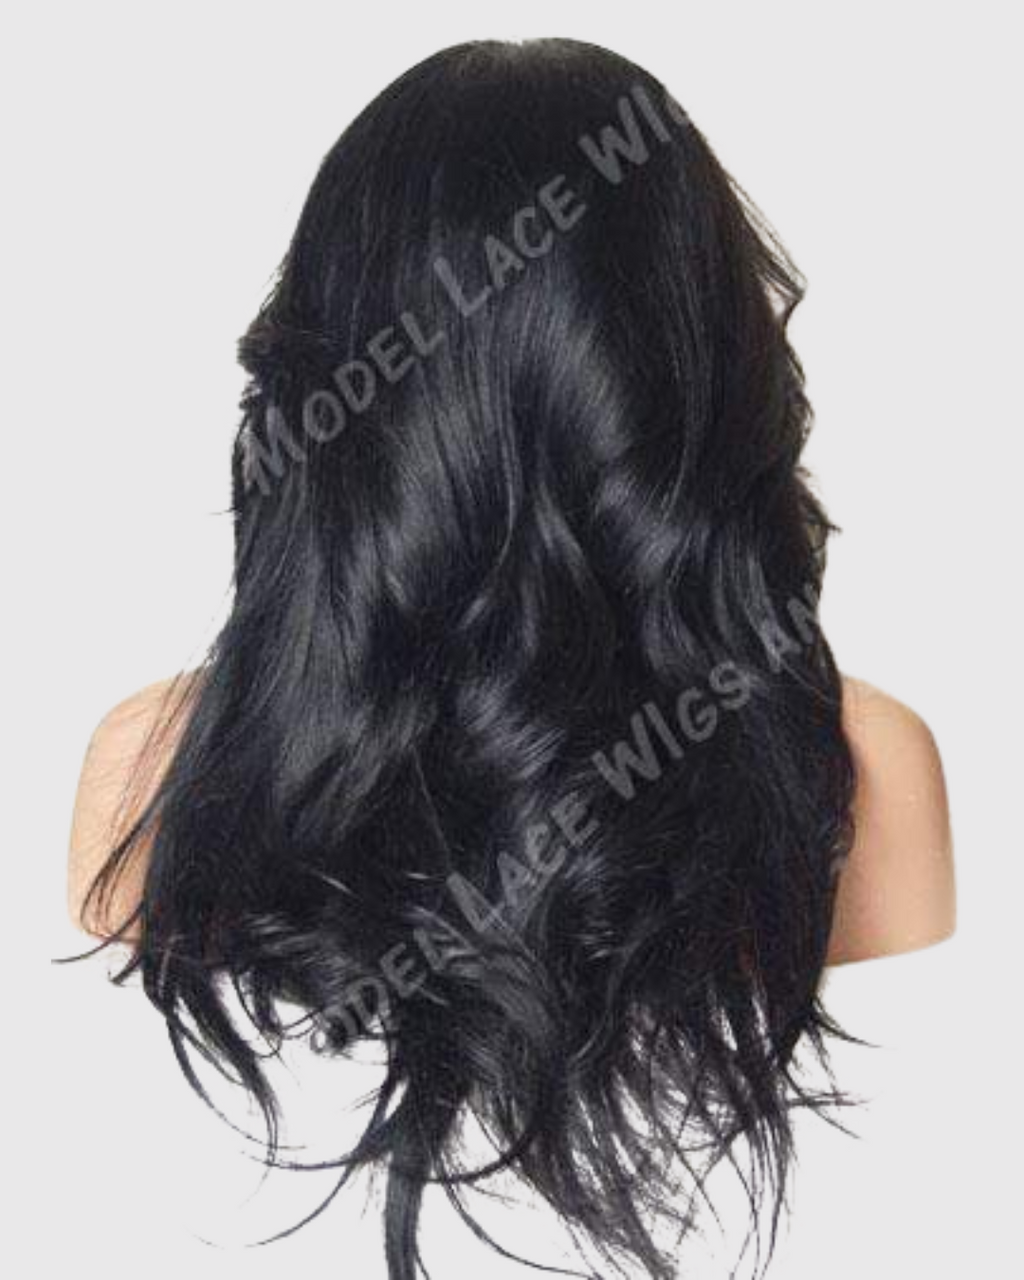 The back view of a lace front wig worn on a mannequin head, showing off long, luxurious black hair with loose waves that flow down past the shoulders. The wig's fullness and texture are visible, and the image is set against a simple, light background to keep the focus on the wig's detail and quality.